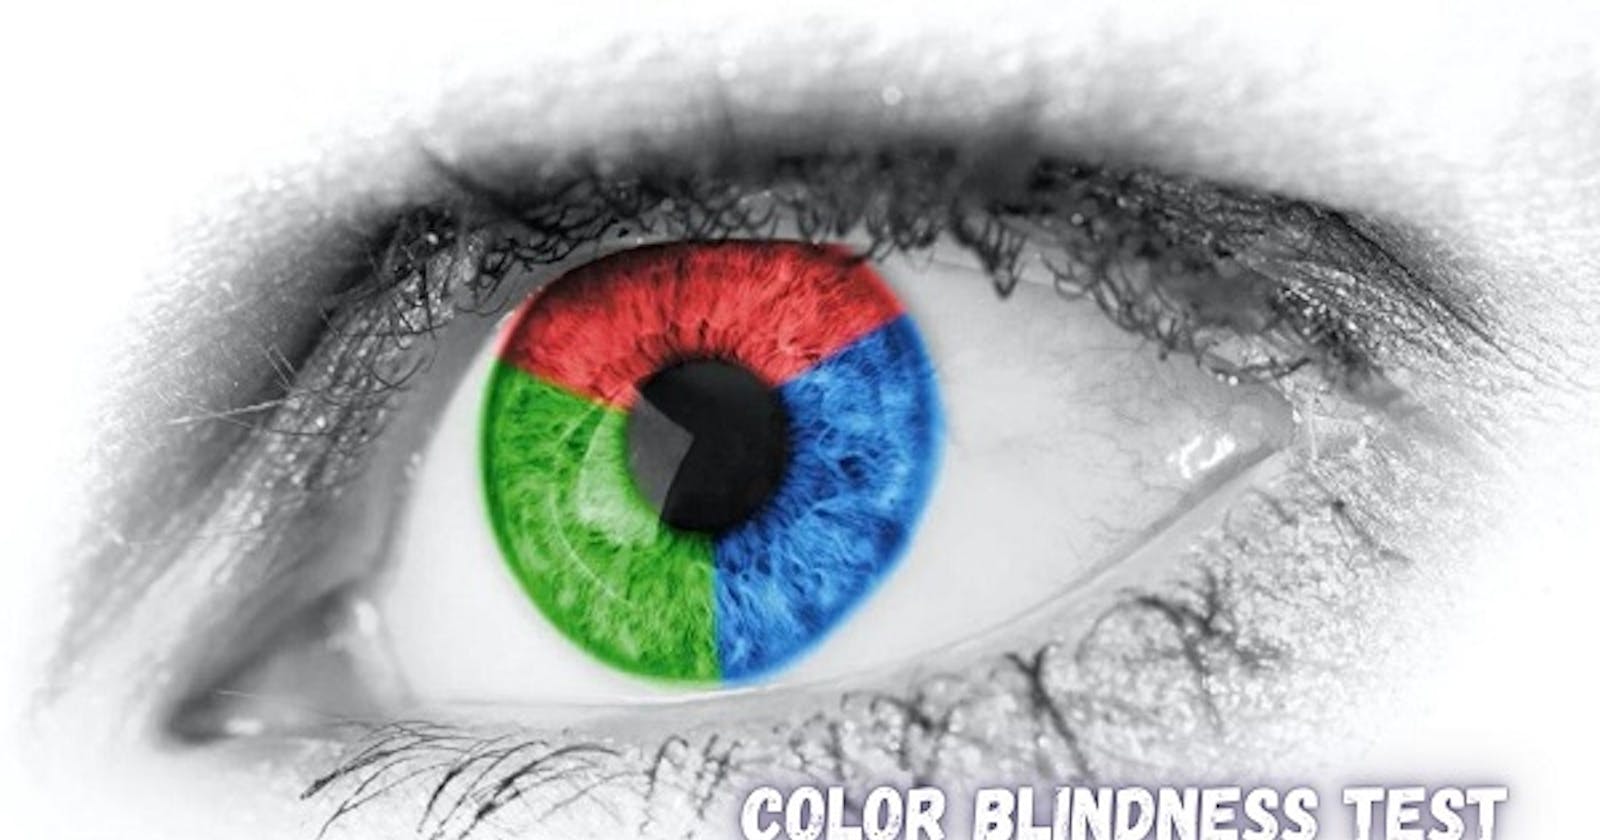 Innovations in Color Vision Testing and Navigating Color Blindness